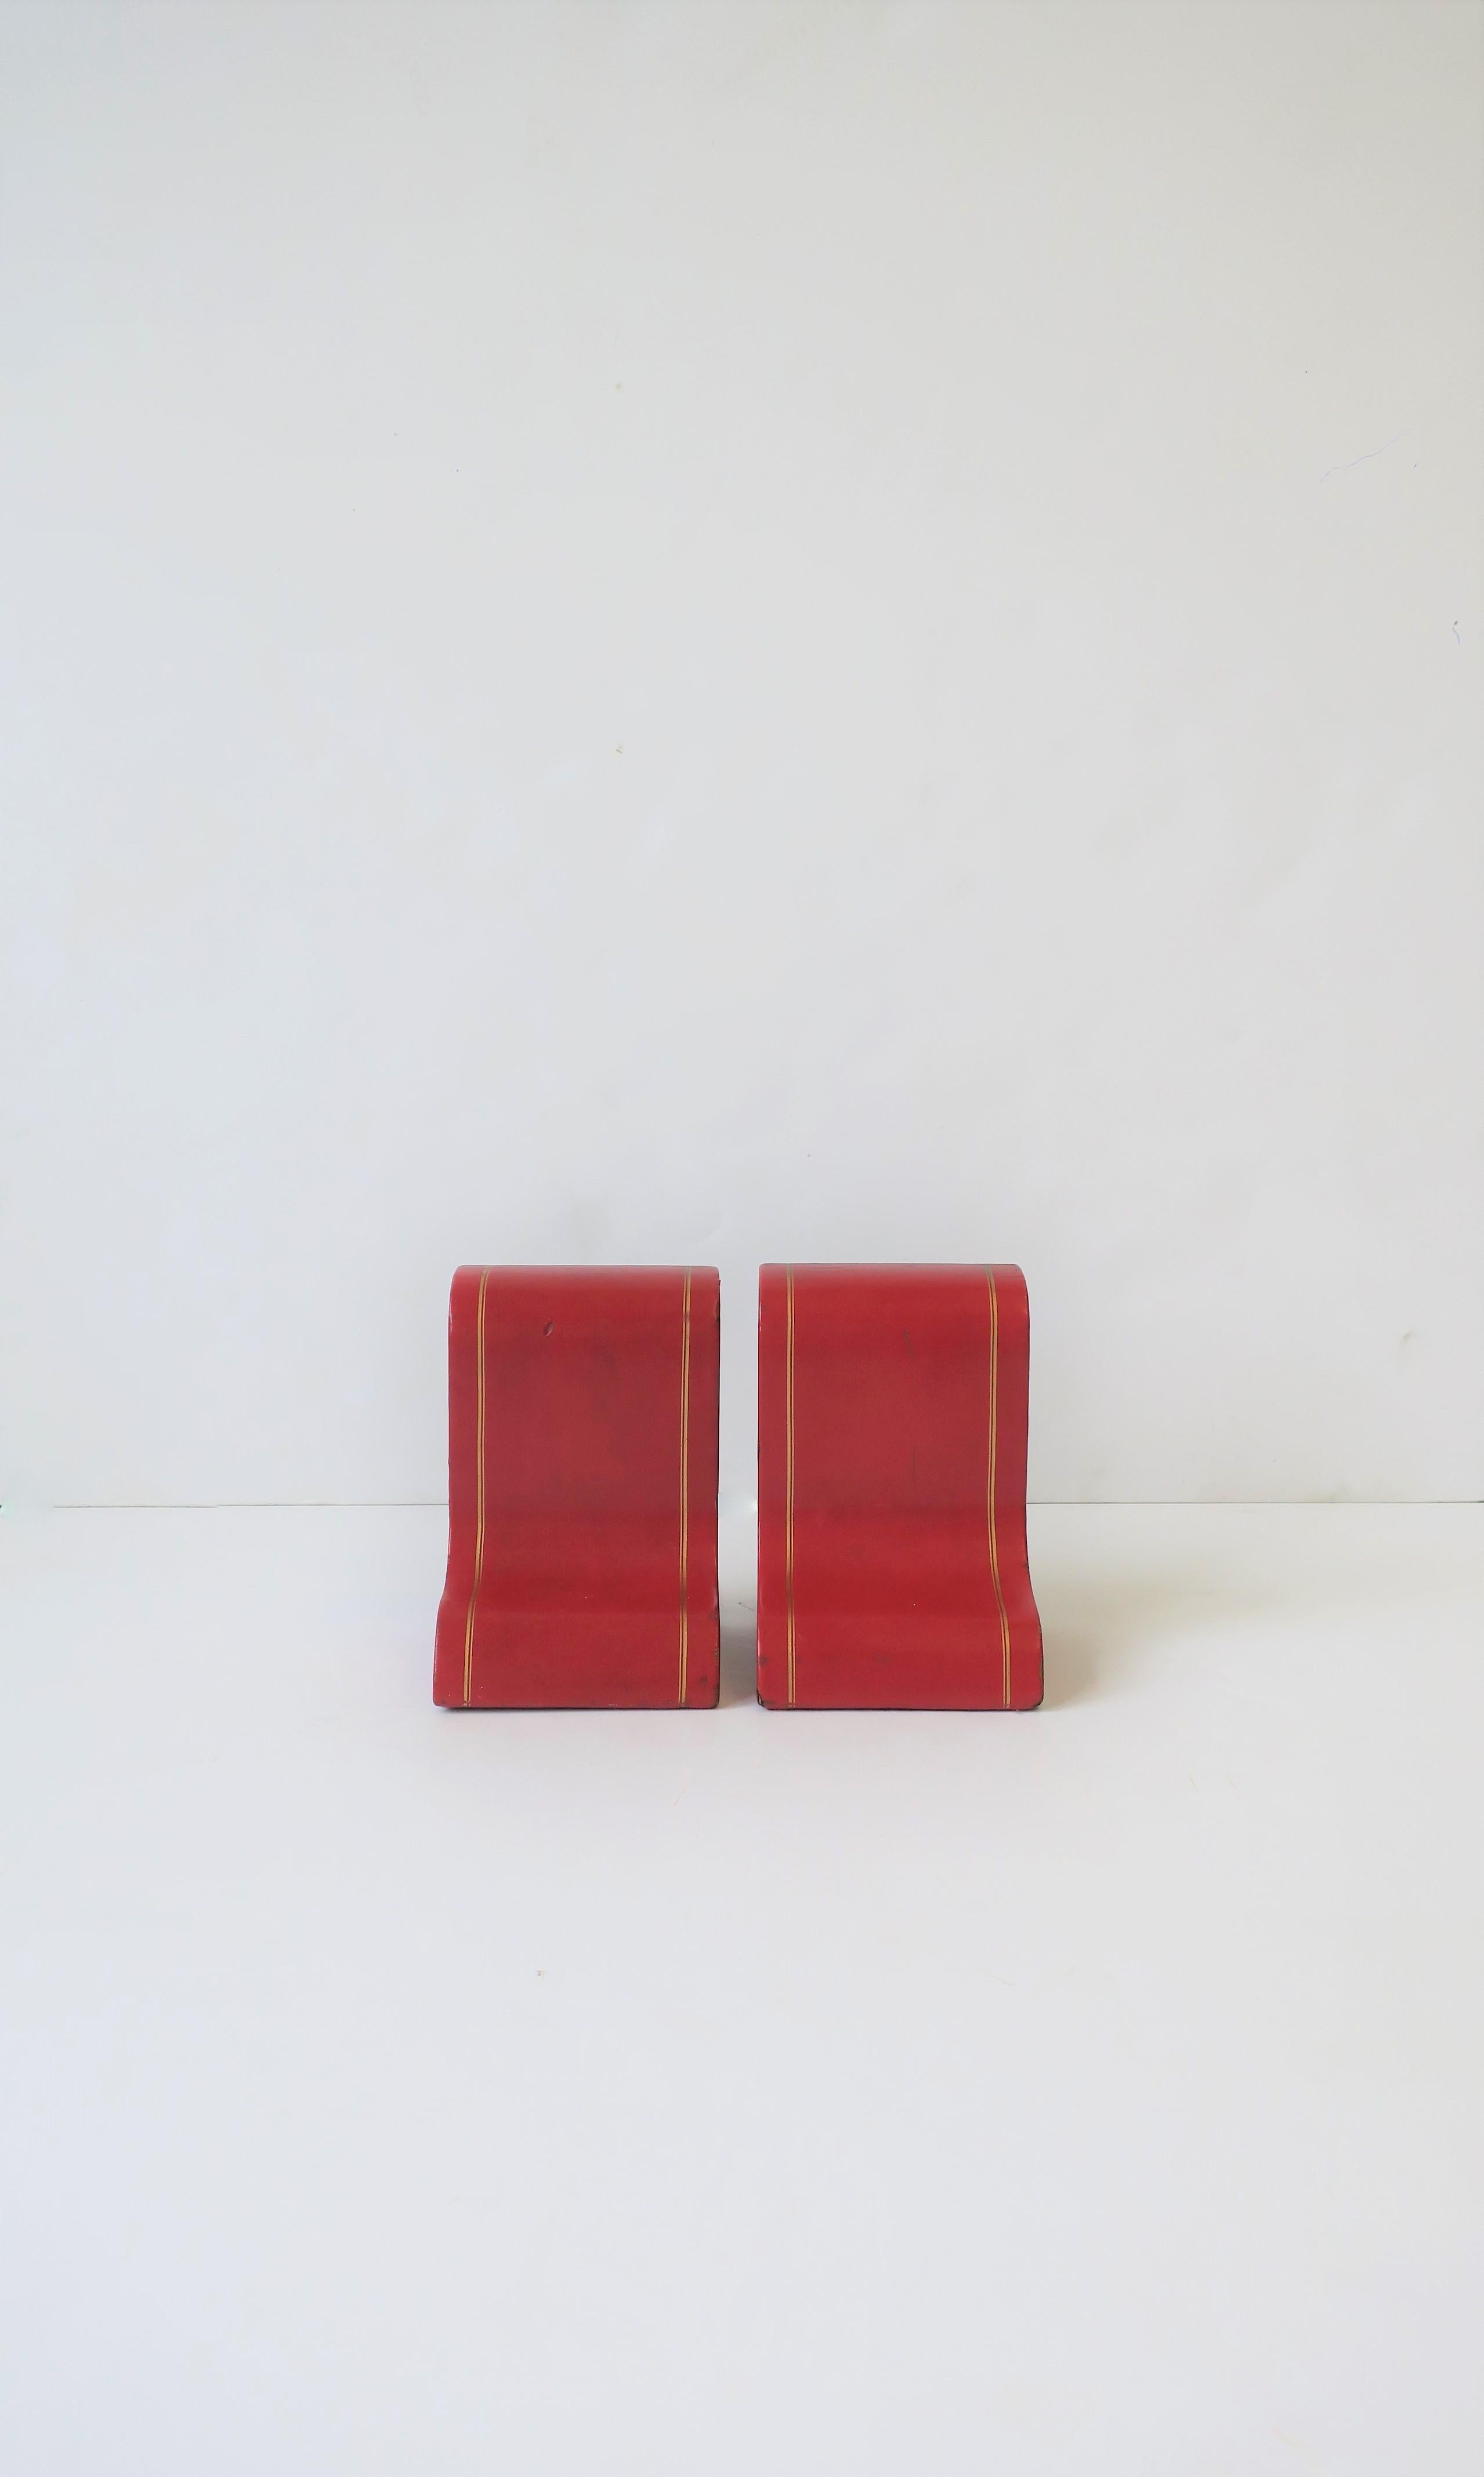 A set of red leather and gold embossed bookends, circa mid-20th century, Italy. A great set for an office, library, bookshelf, etc. Dimension: 5.75